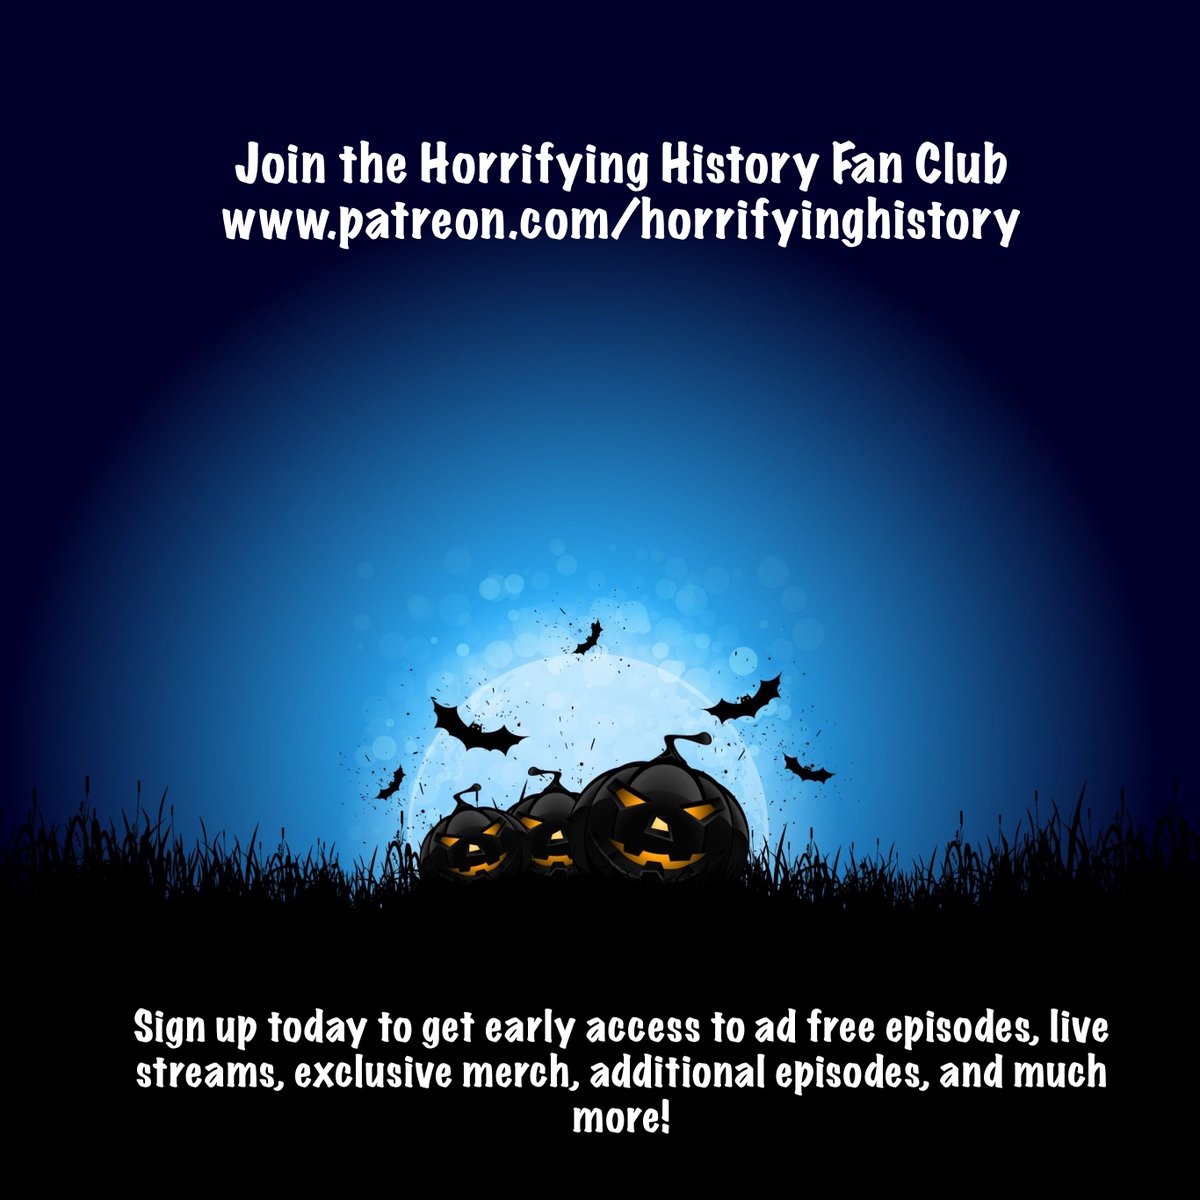 Are you tired of sleeping peacefully at night? Do you crave the heart-pounding thrill of #terrifying tales? Then #buckleup buttercup, and hop on the rollercoaster of #terror with our #HorrifyingHistory fan club on Patreon! Just remember to bring a nightlight. #ScareMeSilly 👻